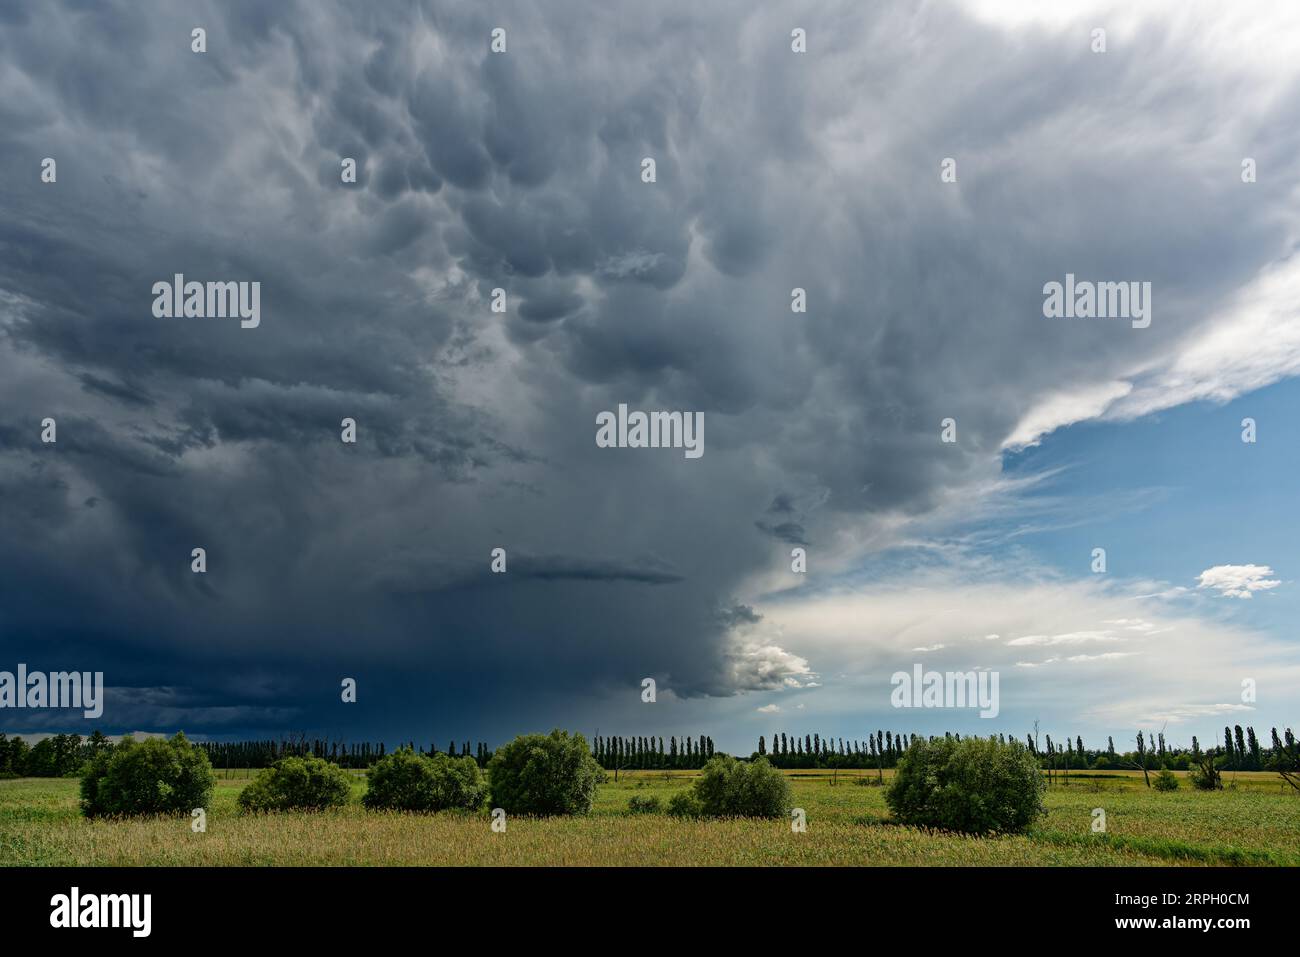 Violent thunderstorm front with threatening cloud formation, where some mammatus clouds have formed and from which rain is partly falling, over a flat Stock Photo